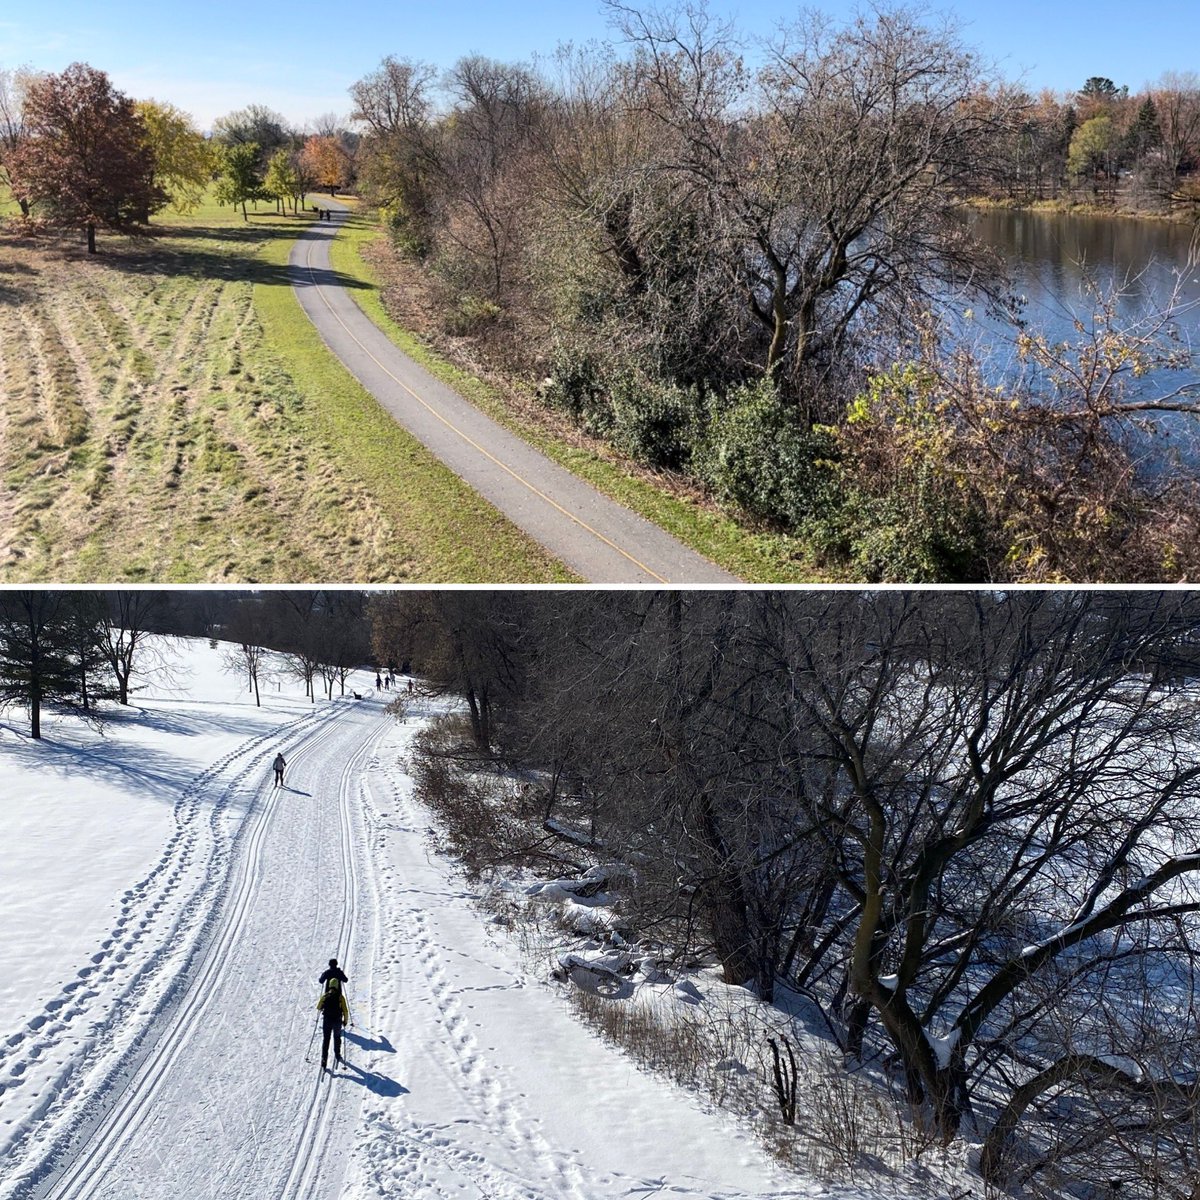 Soon: 🔝 will become bottom as 🍂 transitions to ❄️. Our volunteers are getting ready to bring the Rideau Winter Trail back to life! Give us a follow to stay tuned on our progress.